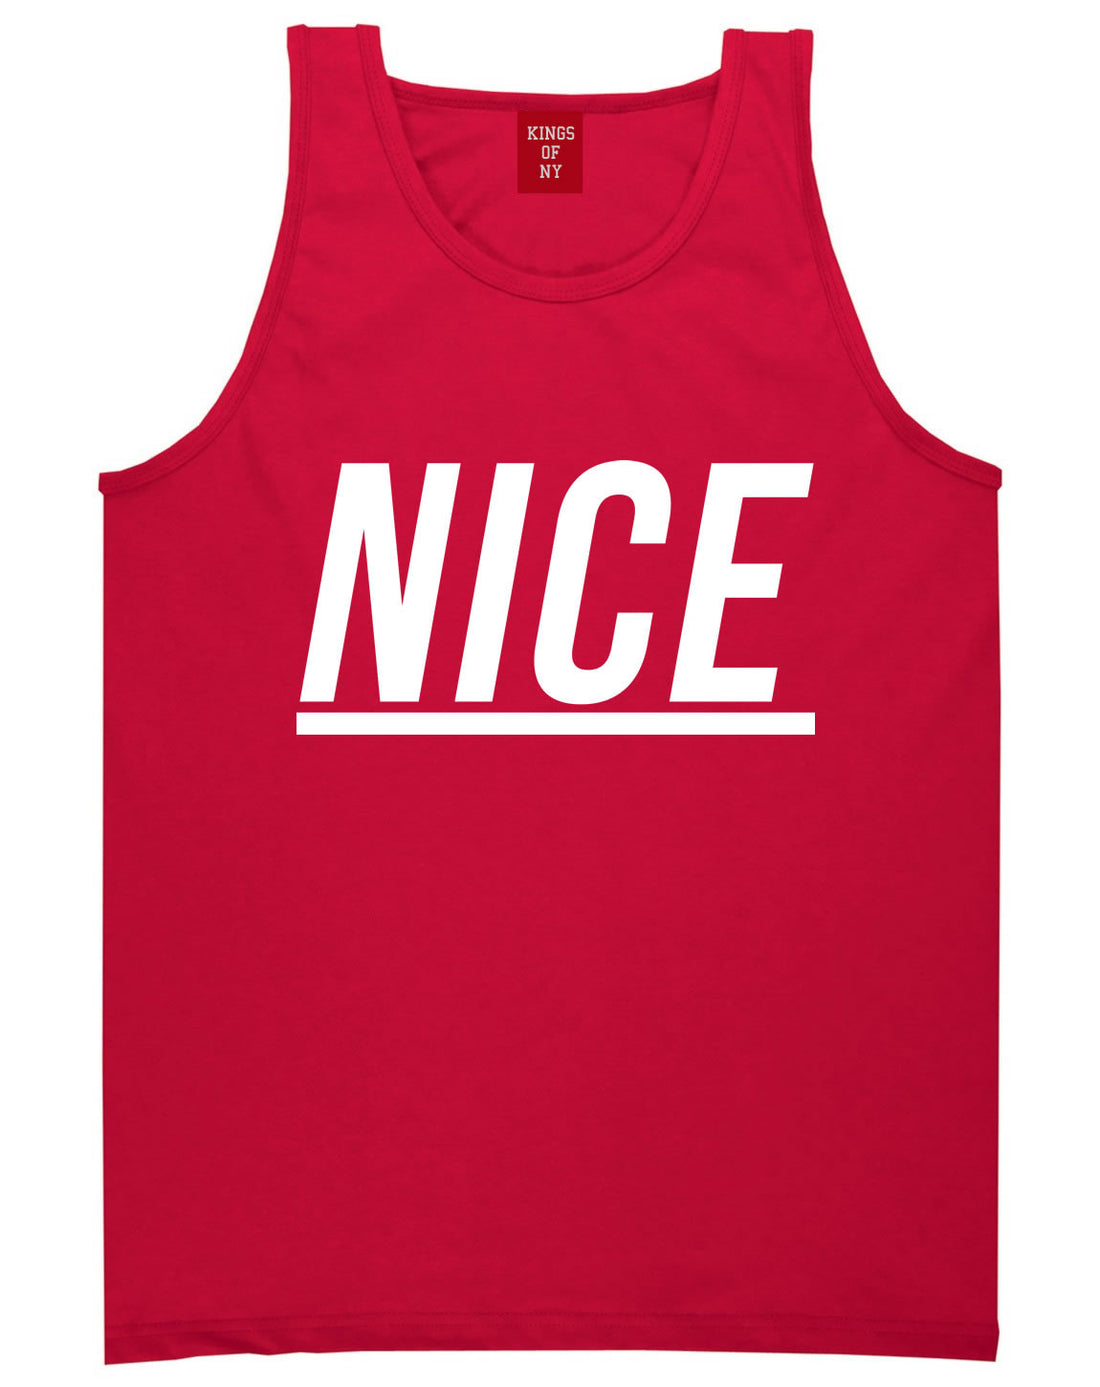 Nice Tank Top in Red by Kings Of NY